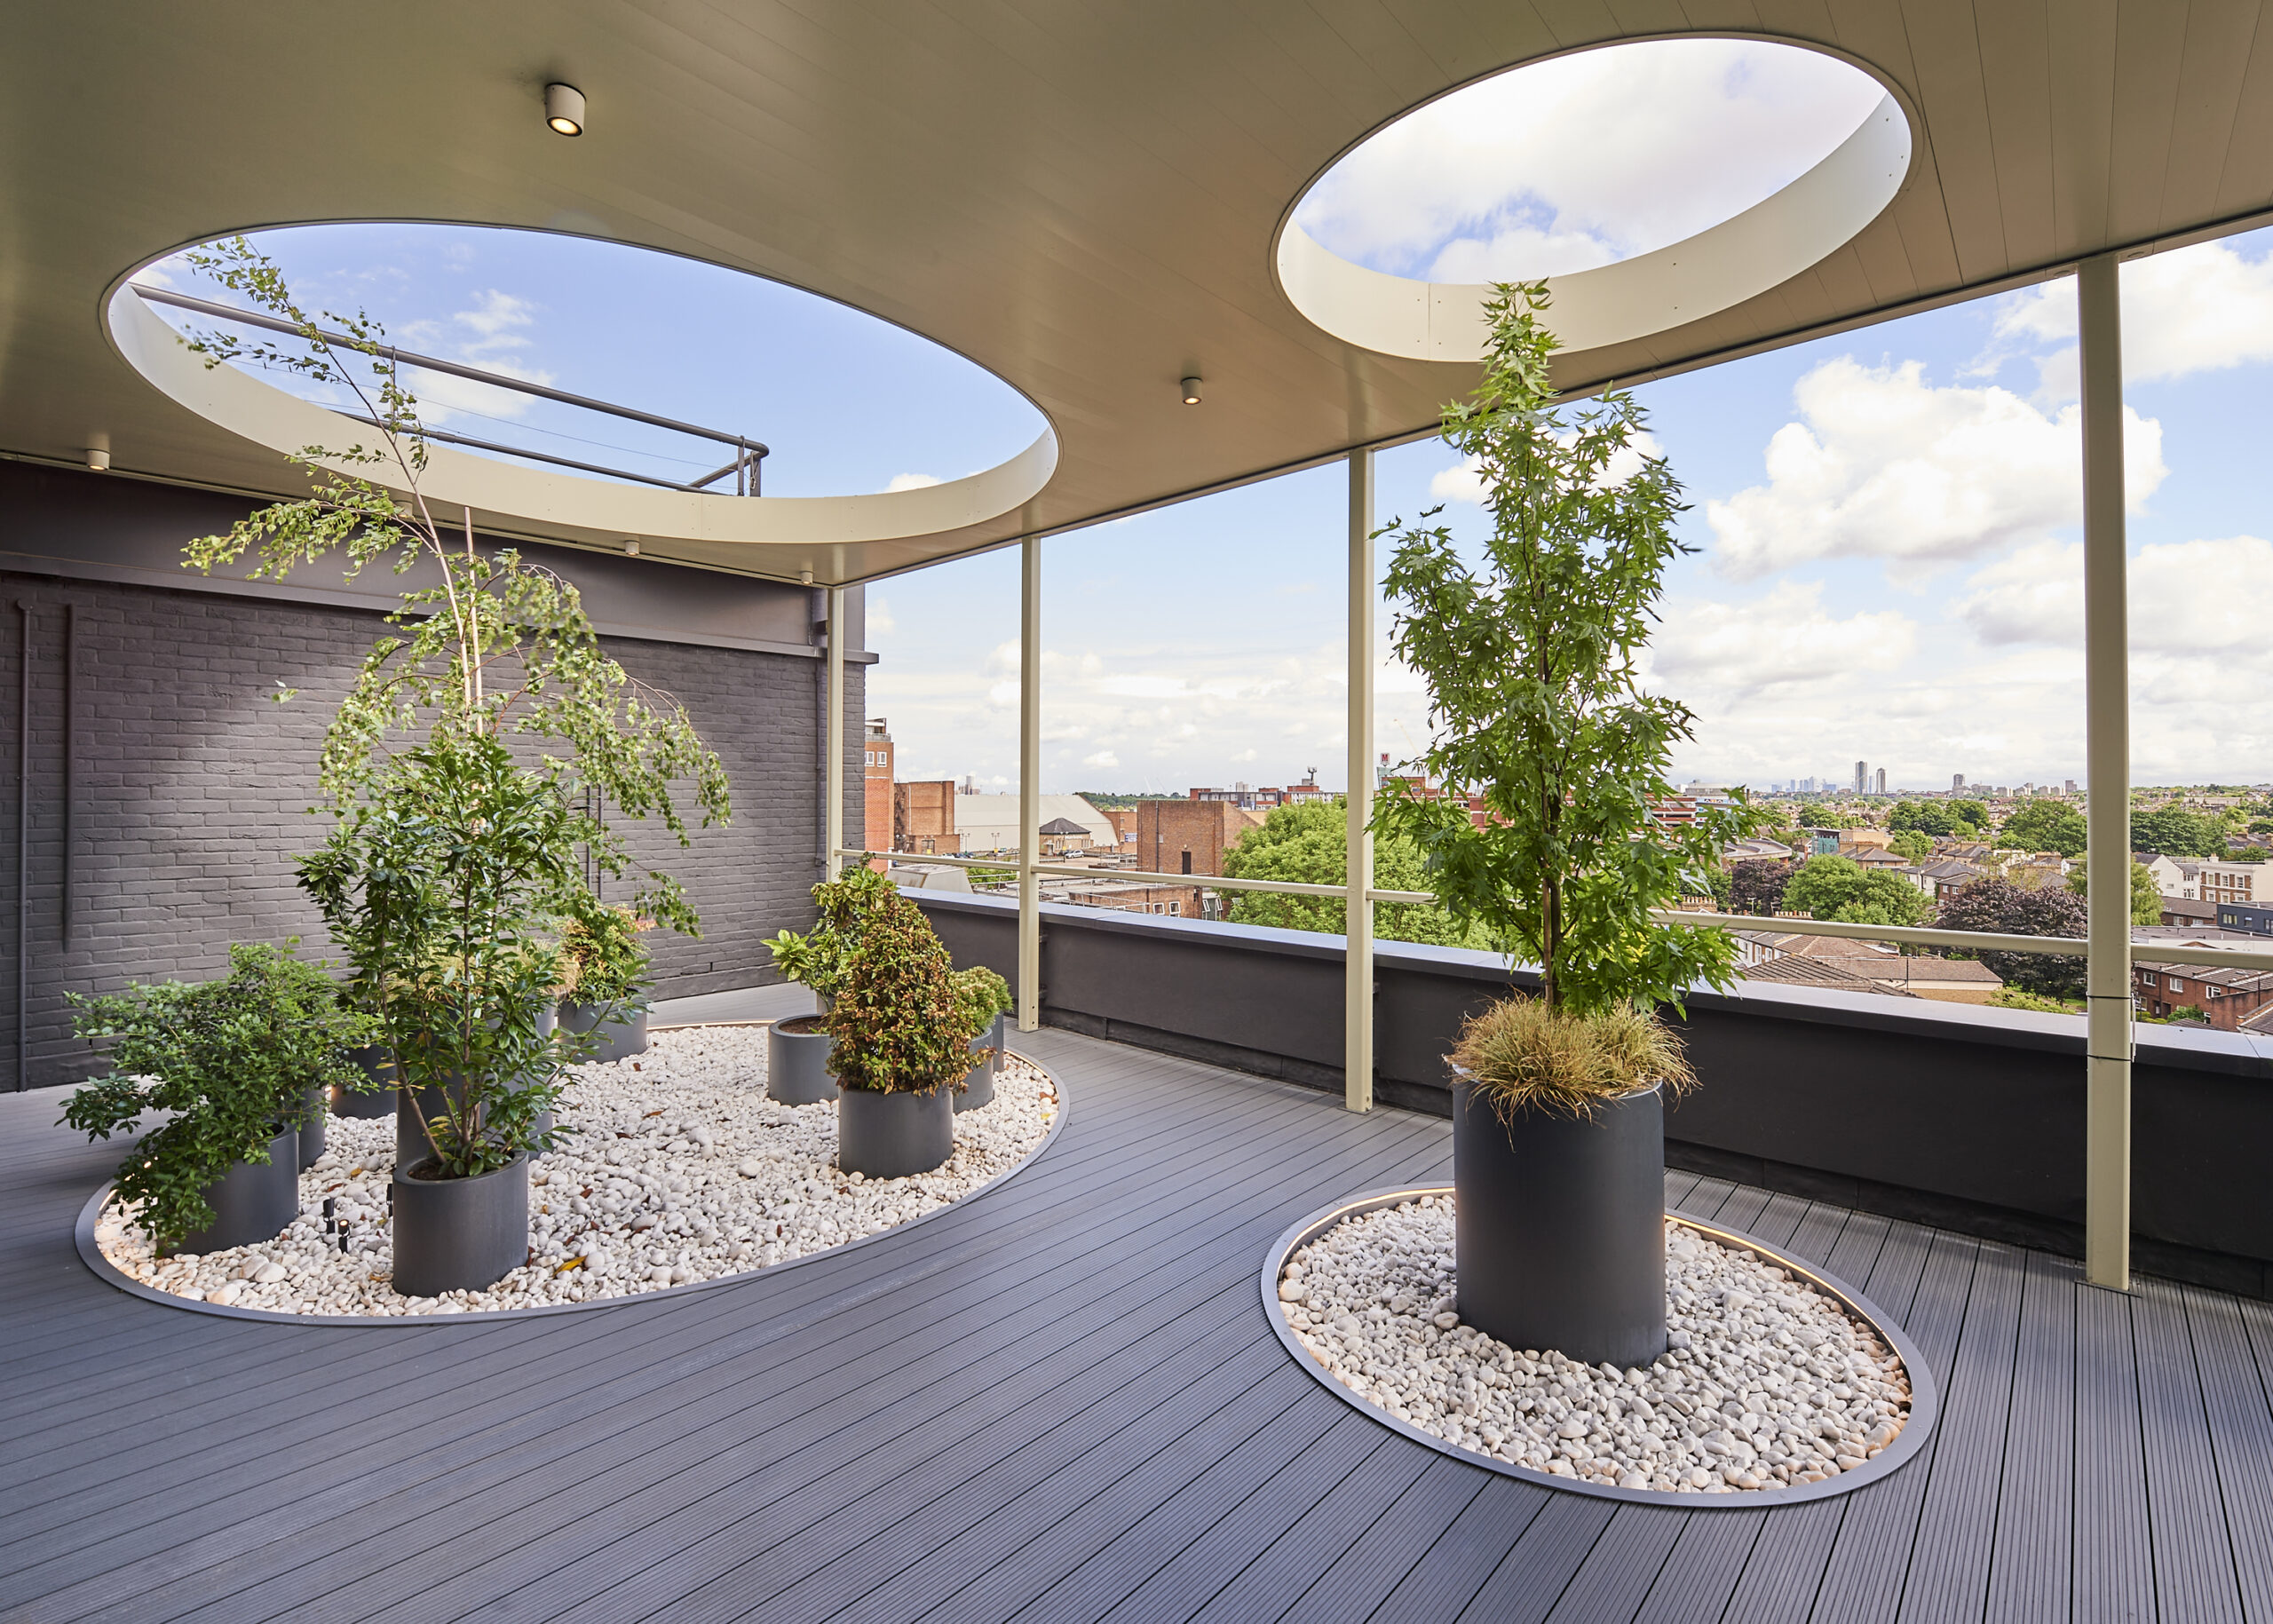 External roof terrace with plants pots and views of London at Greenside House